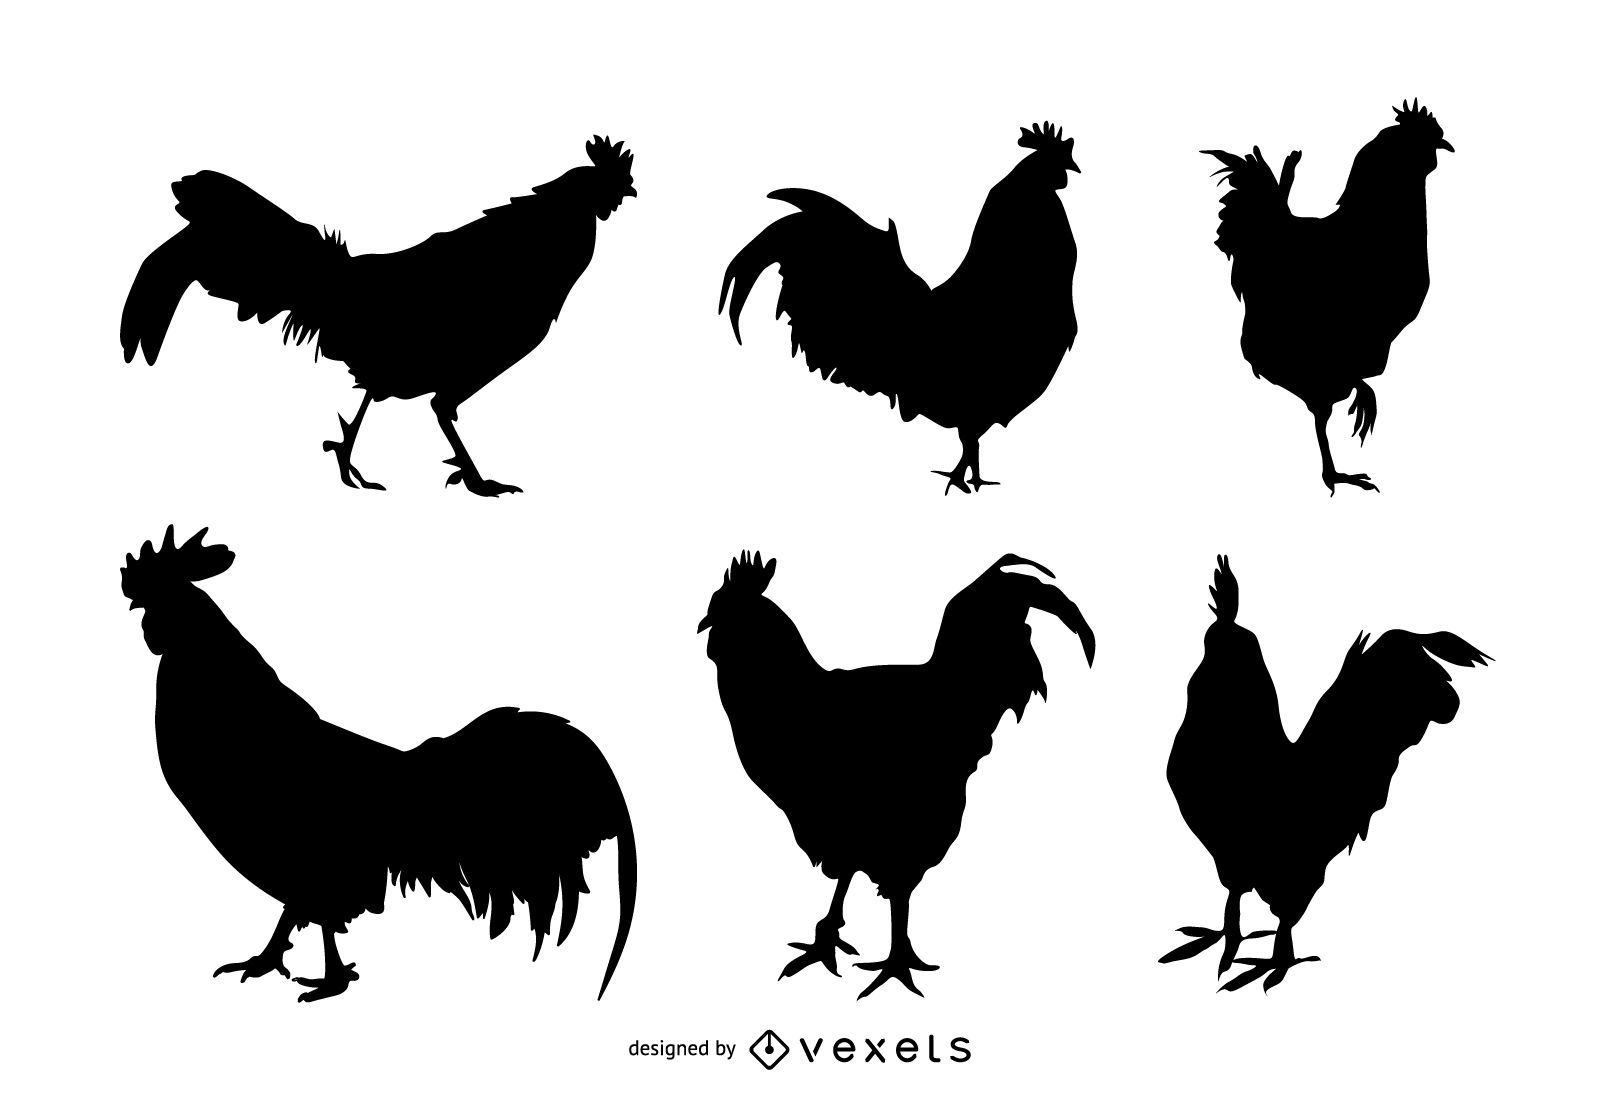 Rooster silhouette set